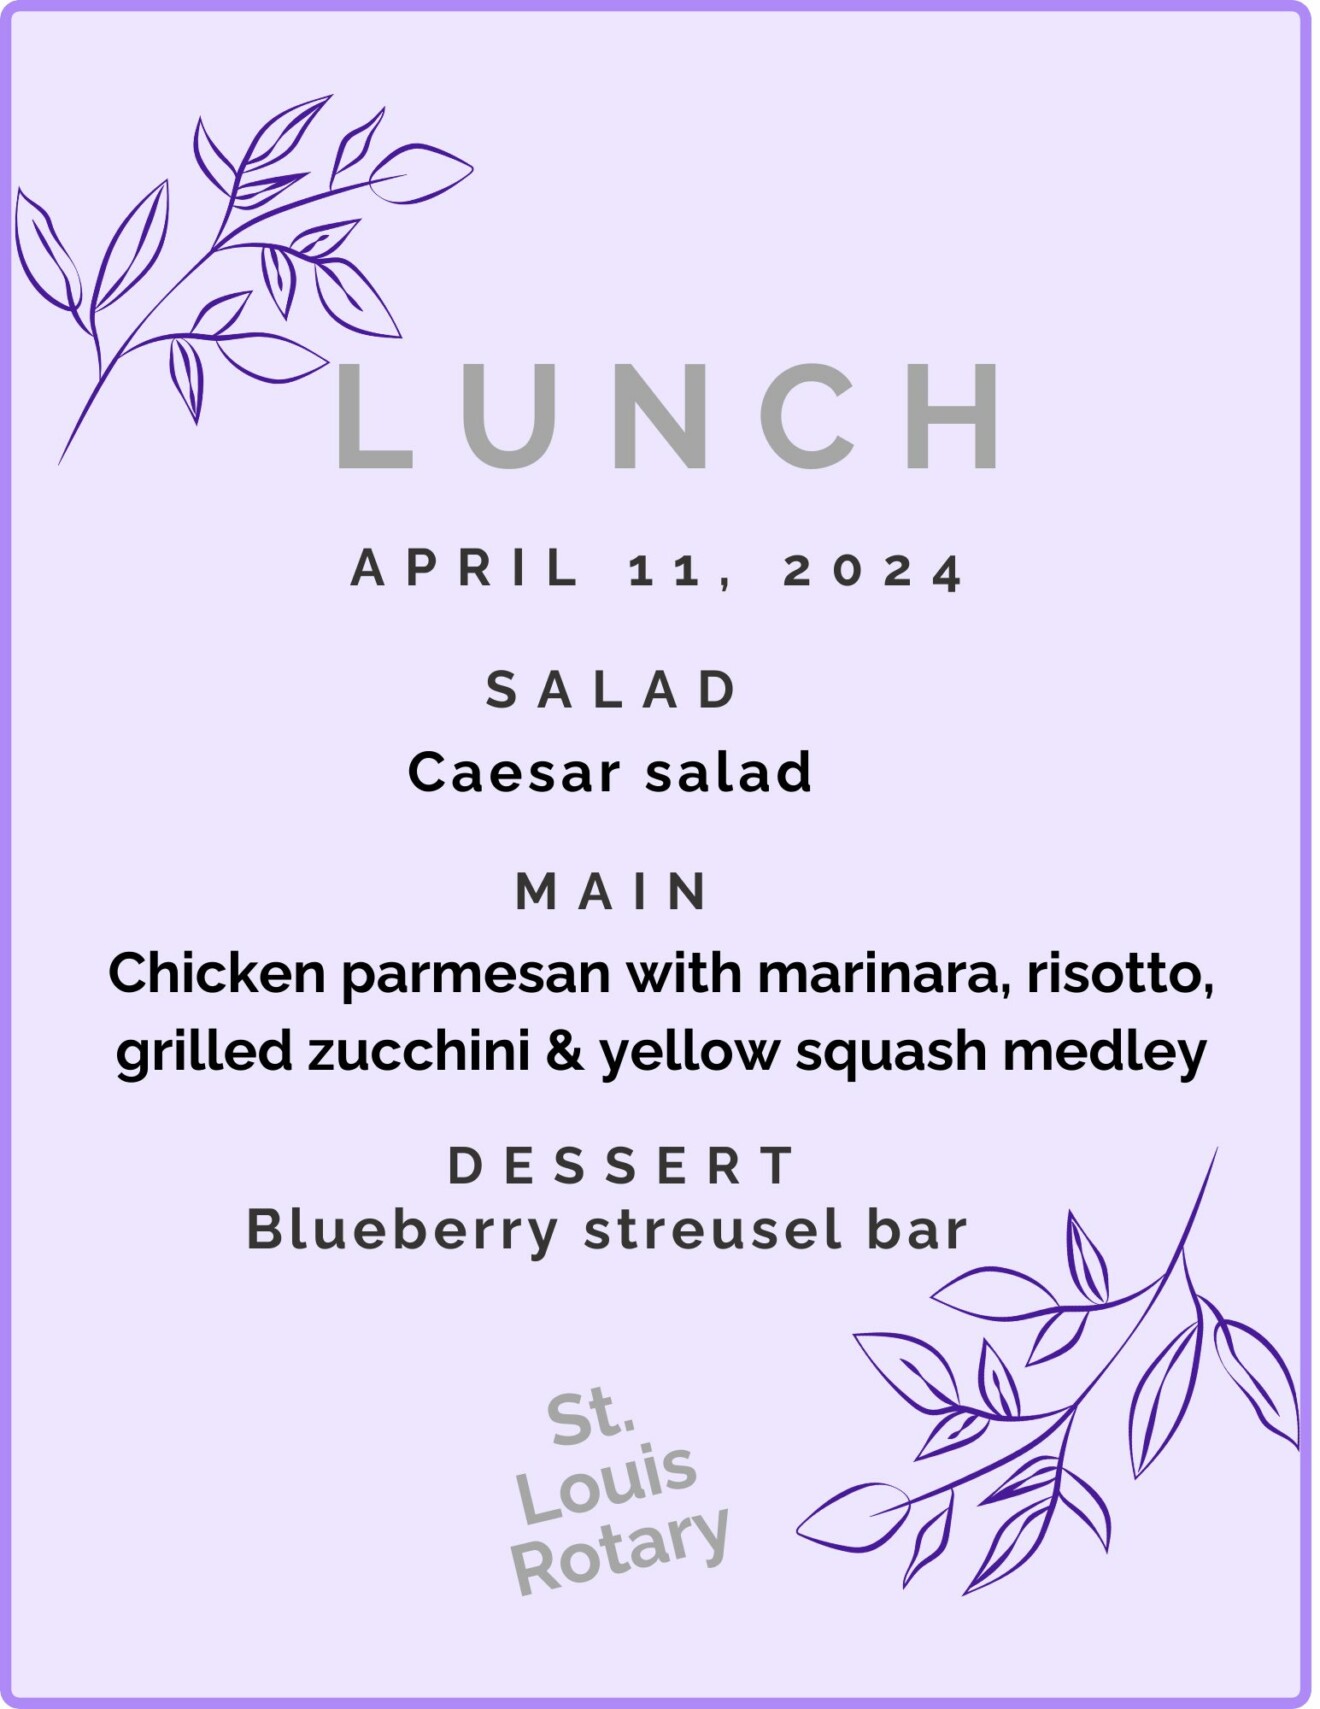 4-11-24 Lunch Menu for St. Louis Rotary Club